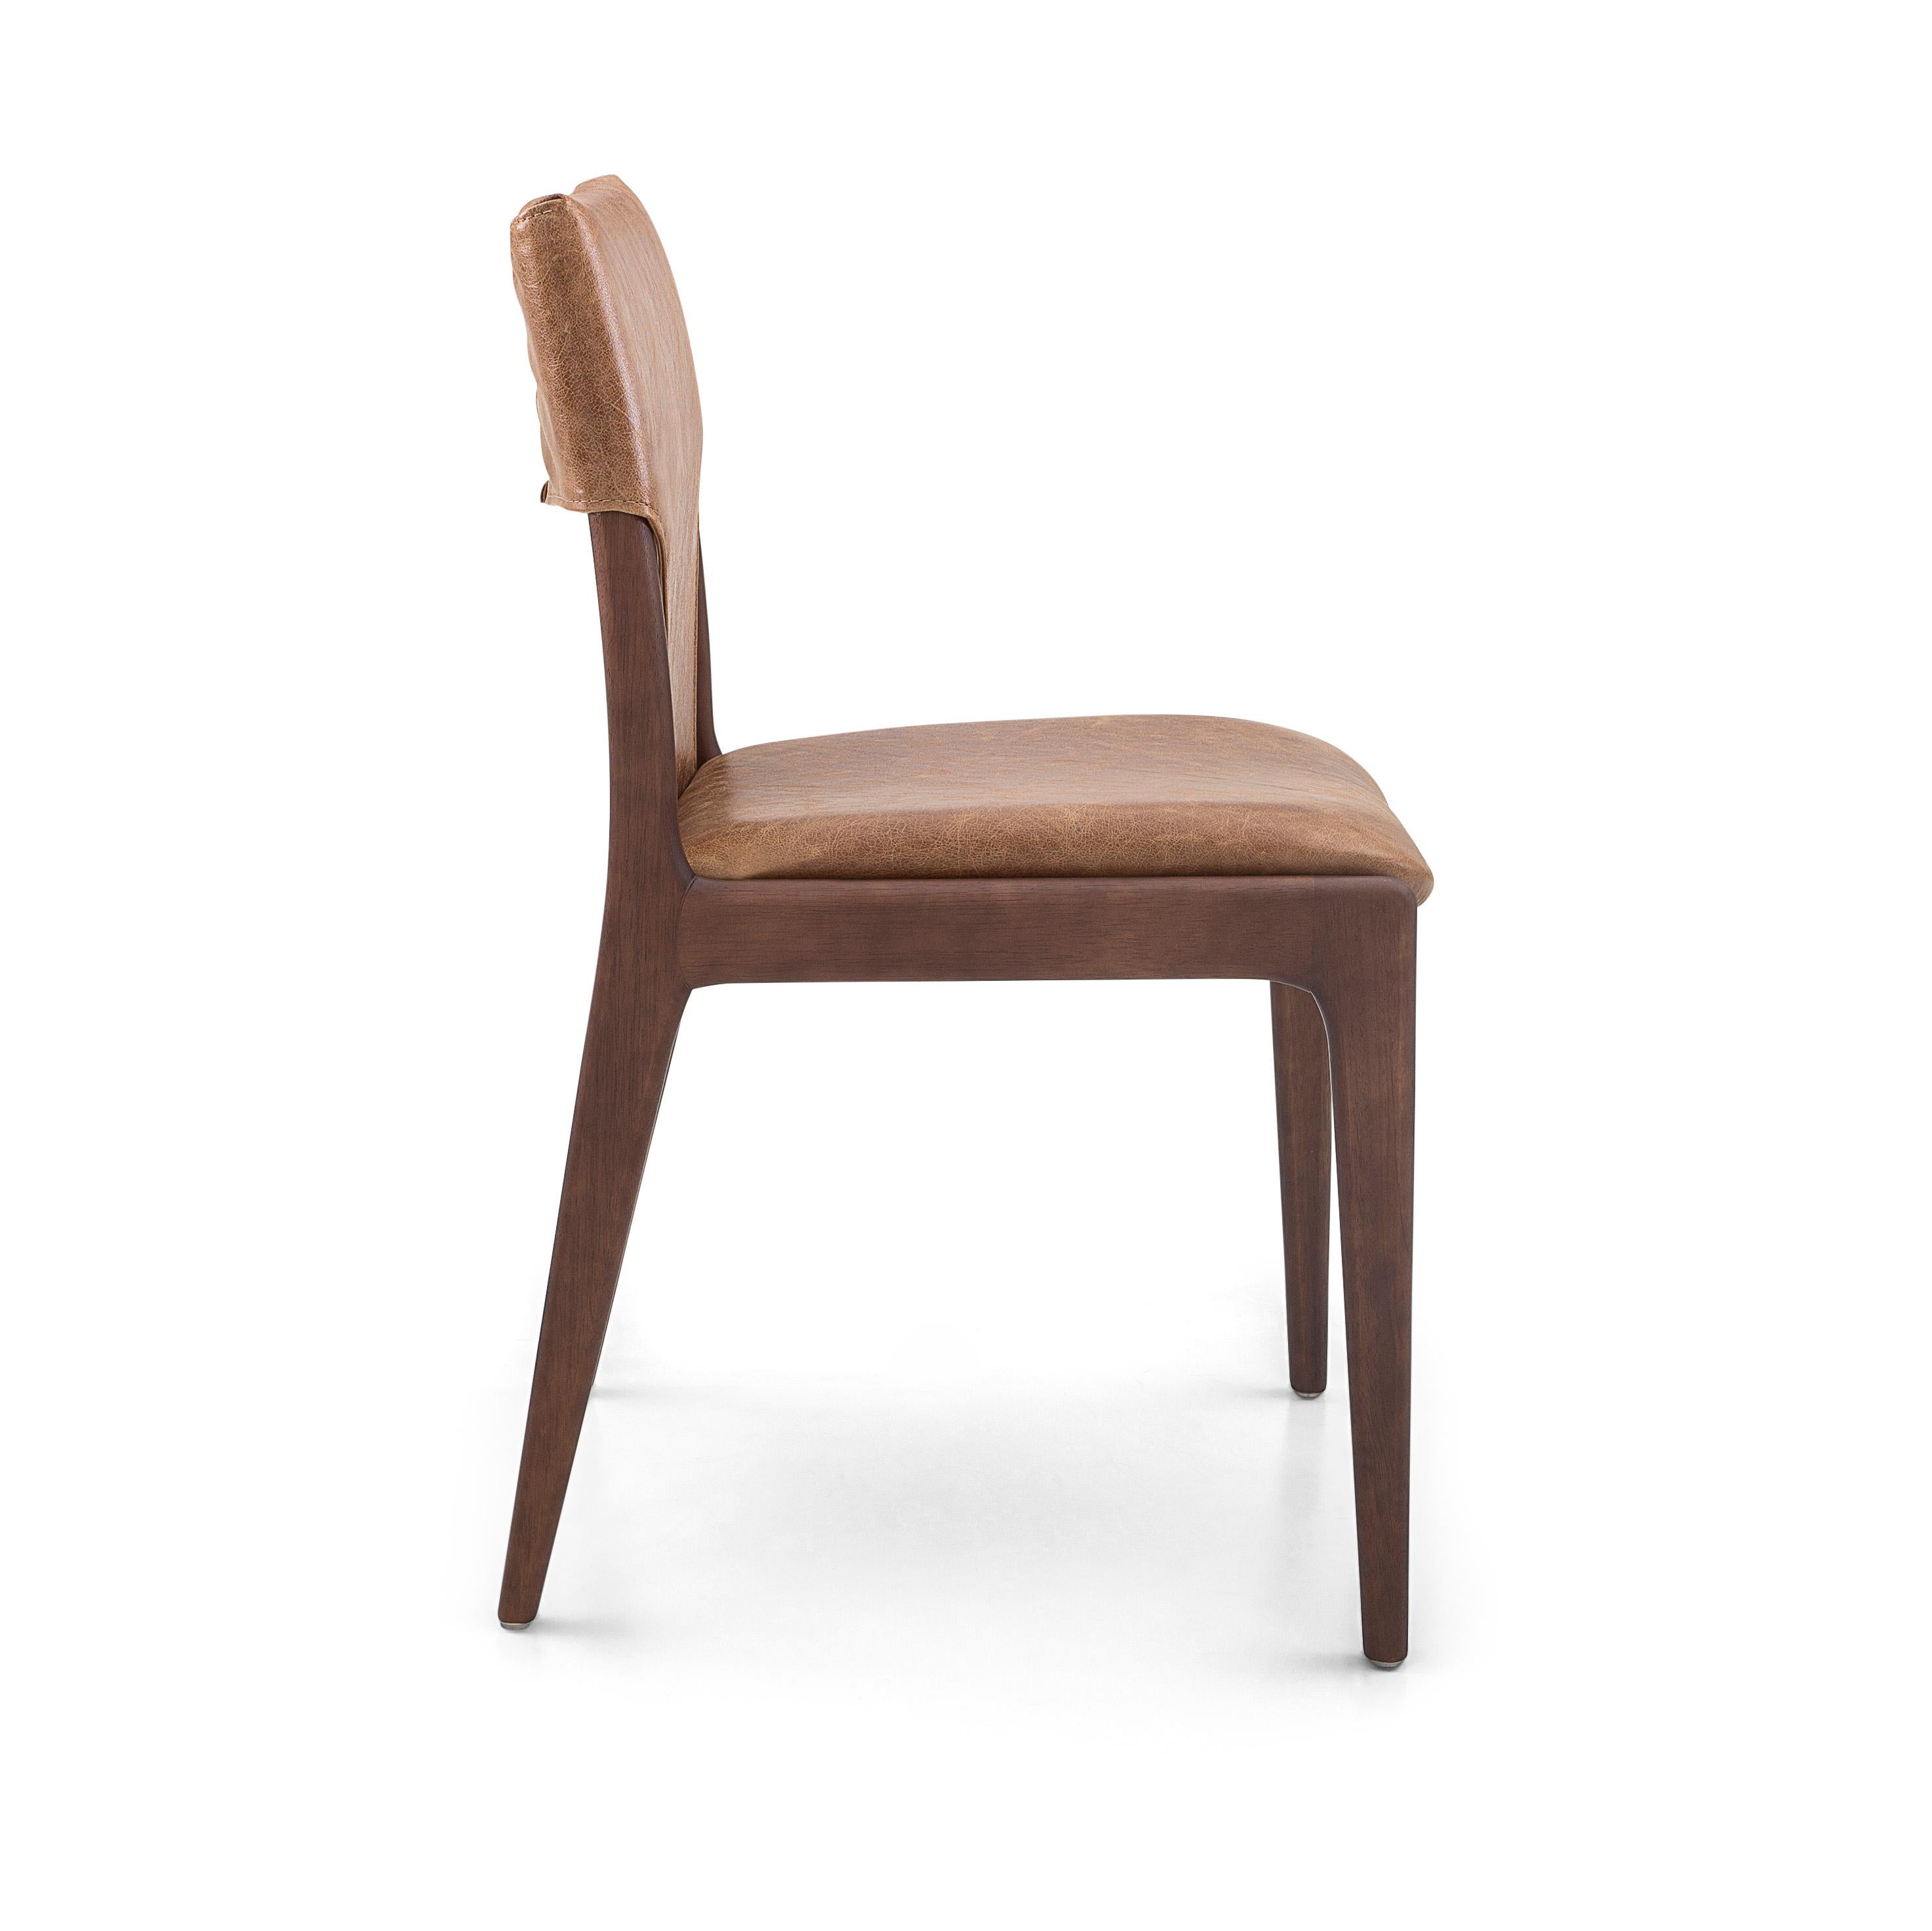 Contemporary Tress Brown Leather Upholstered Dining Chair in Walnut Wood Finish, Set of 2 For Sale